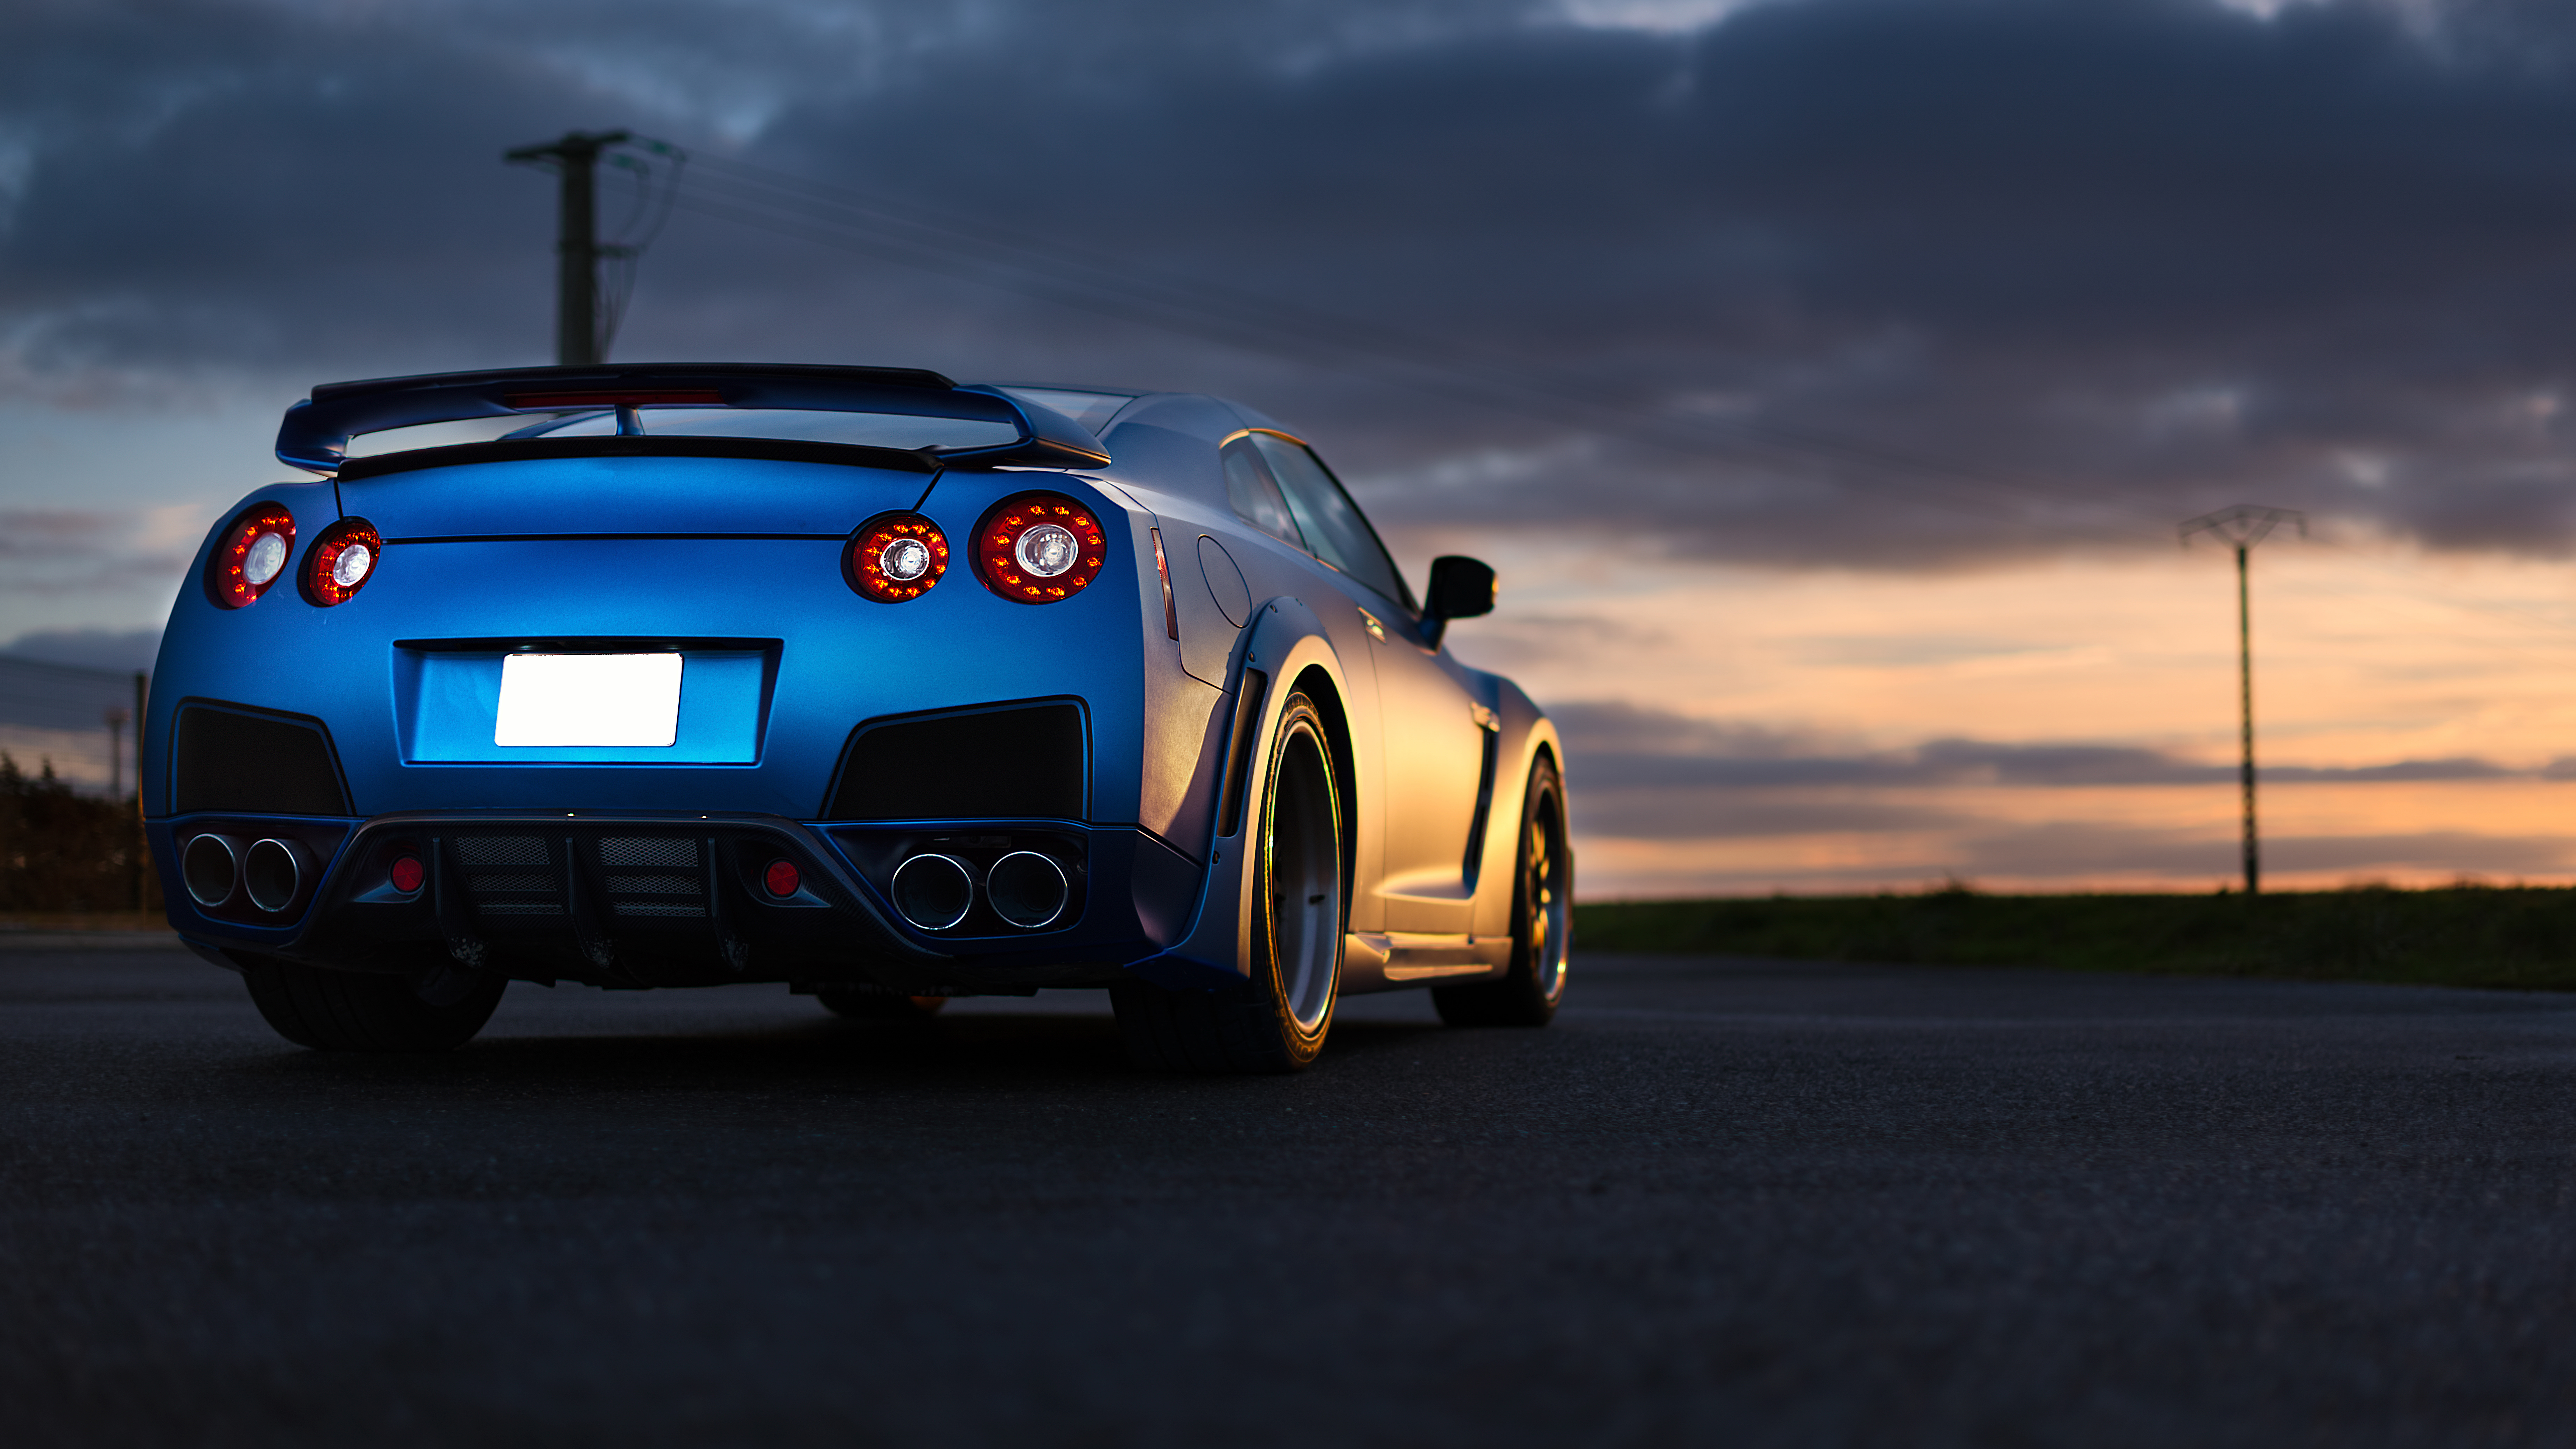 Nissan GTR 8k, HD Cars, 4k Wallpapers, Images, Backgrounds ...